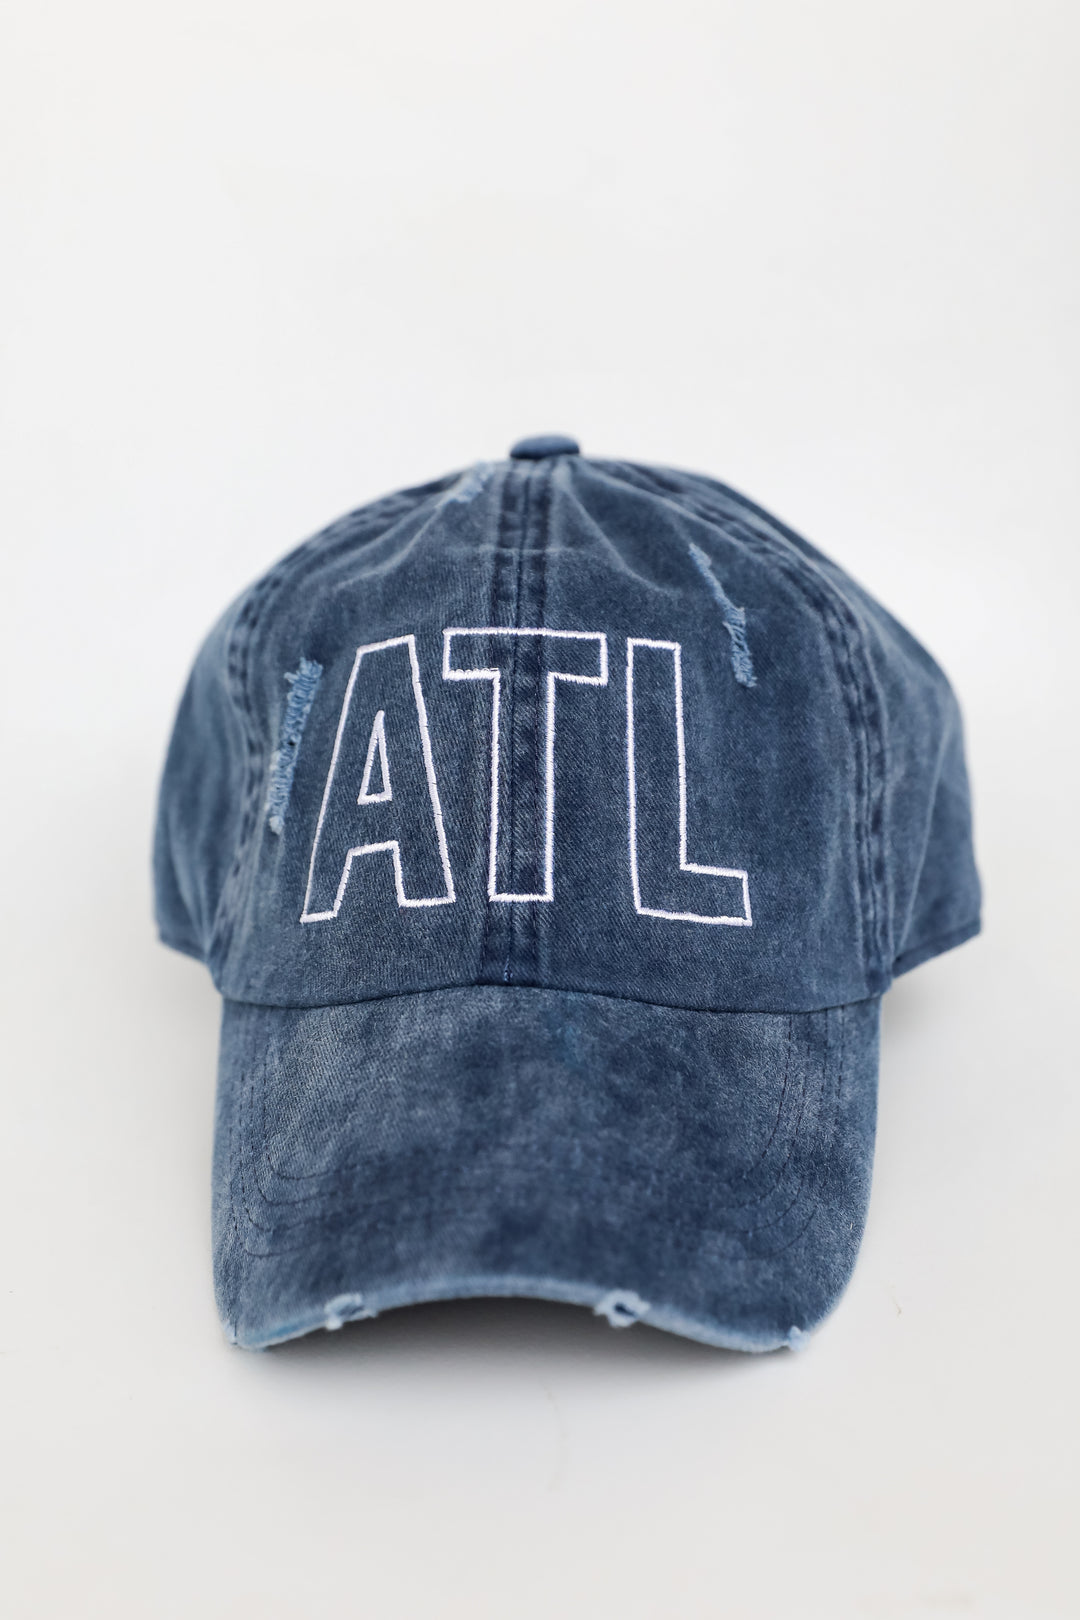 ATL Distressed Embroidered Hat